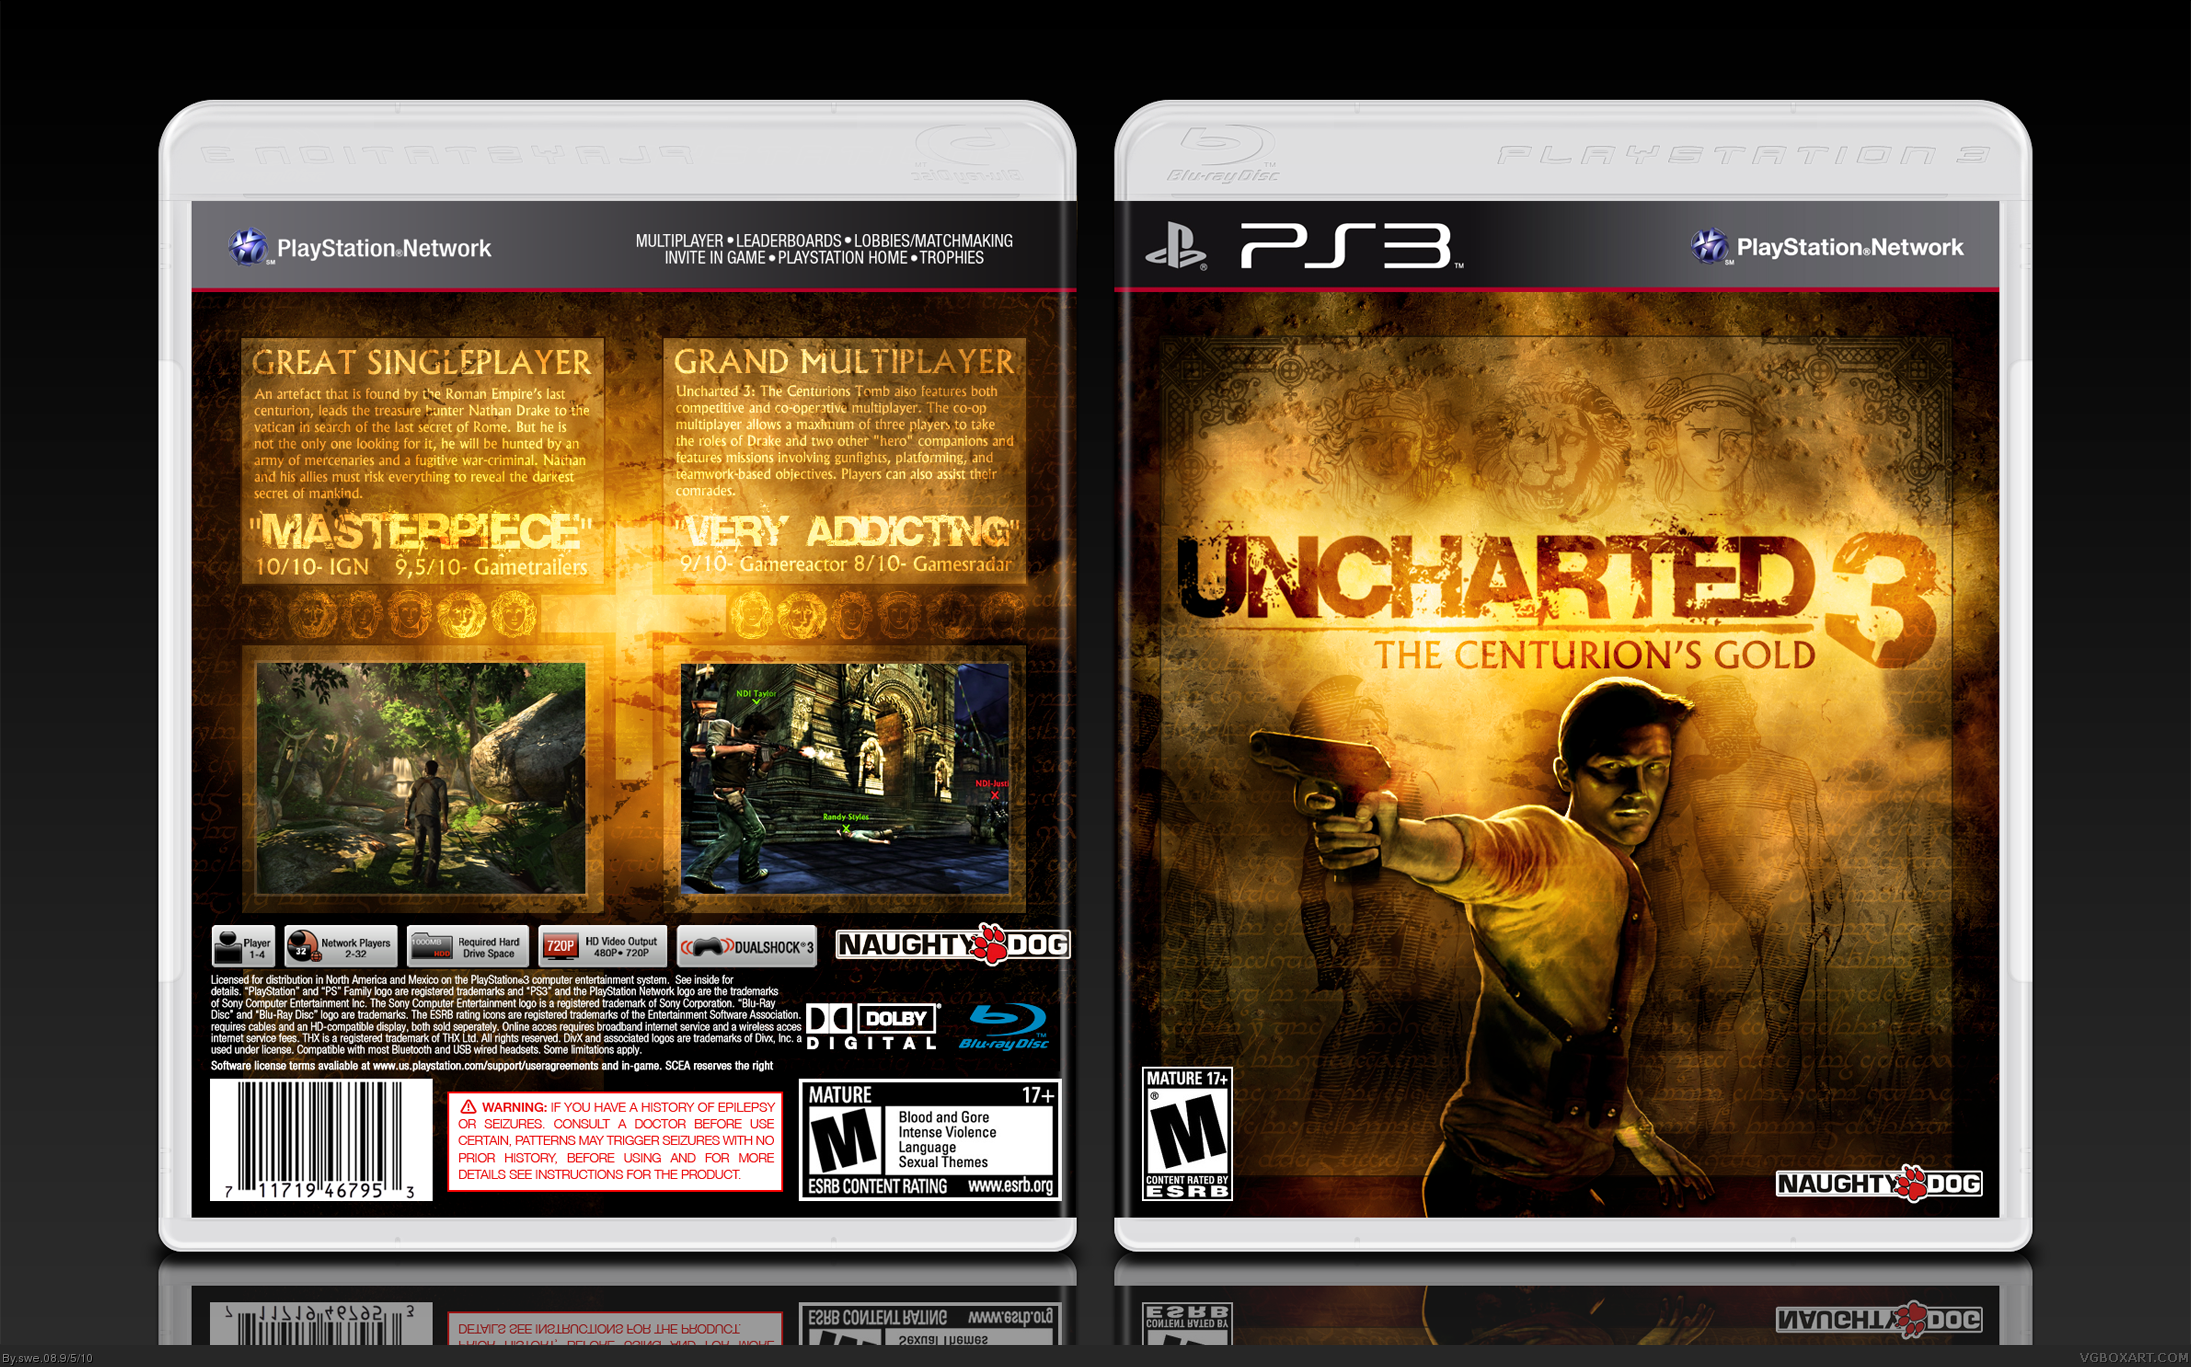 Uncharted 3: The Centurions Gold box cover